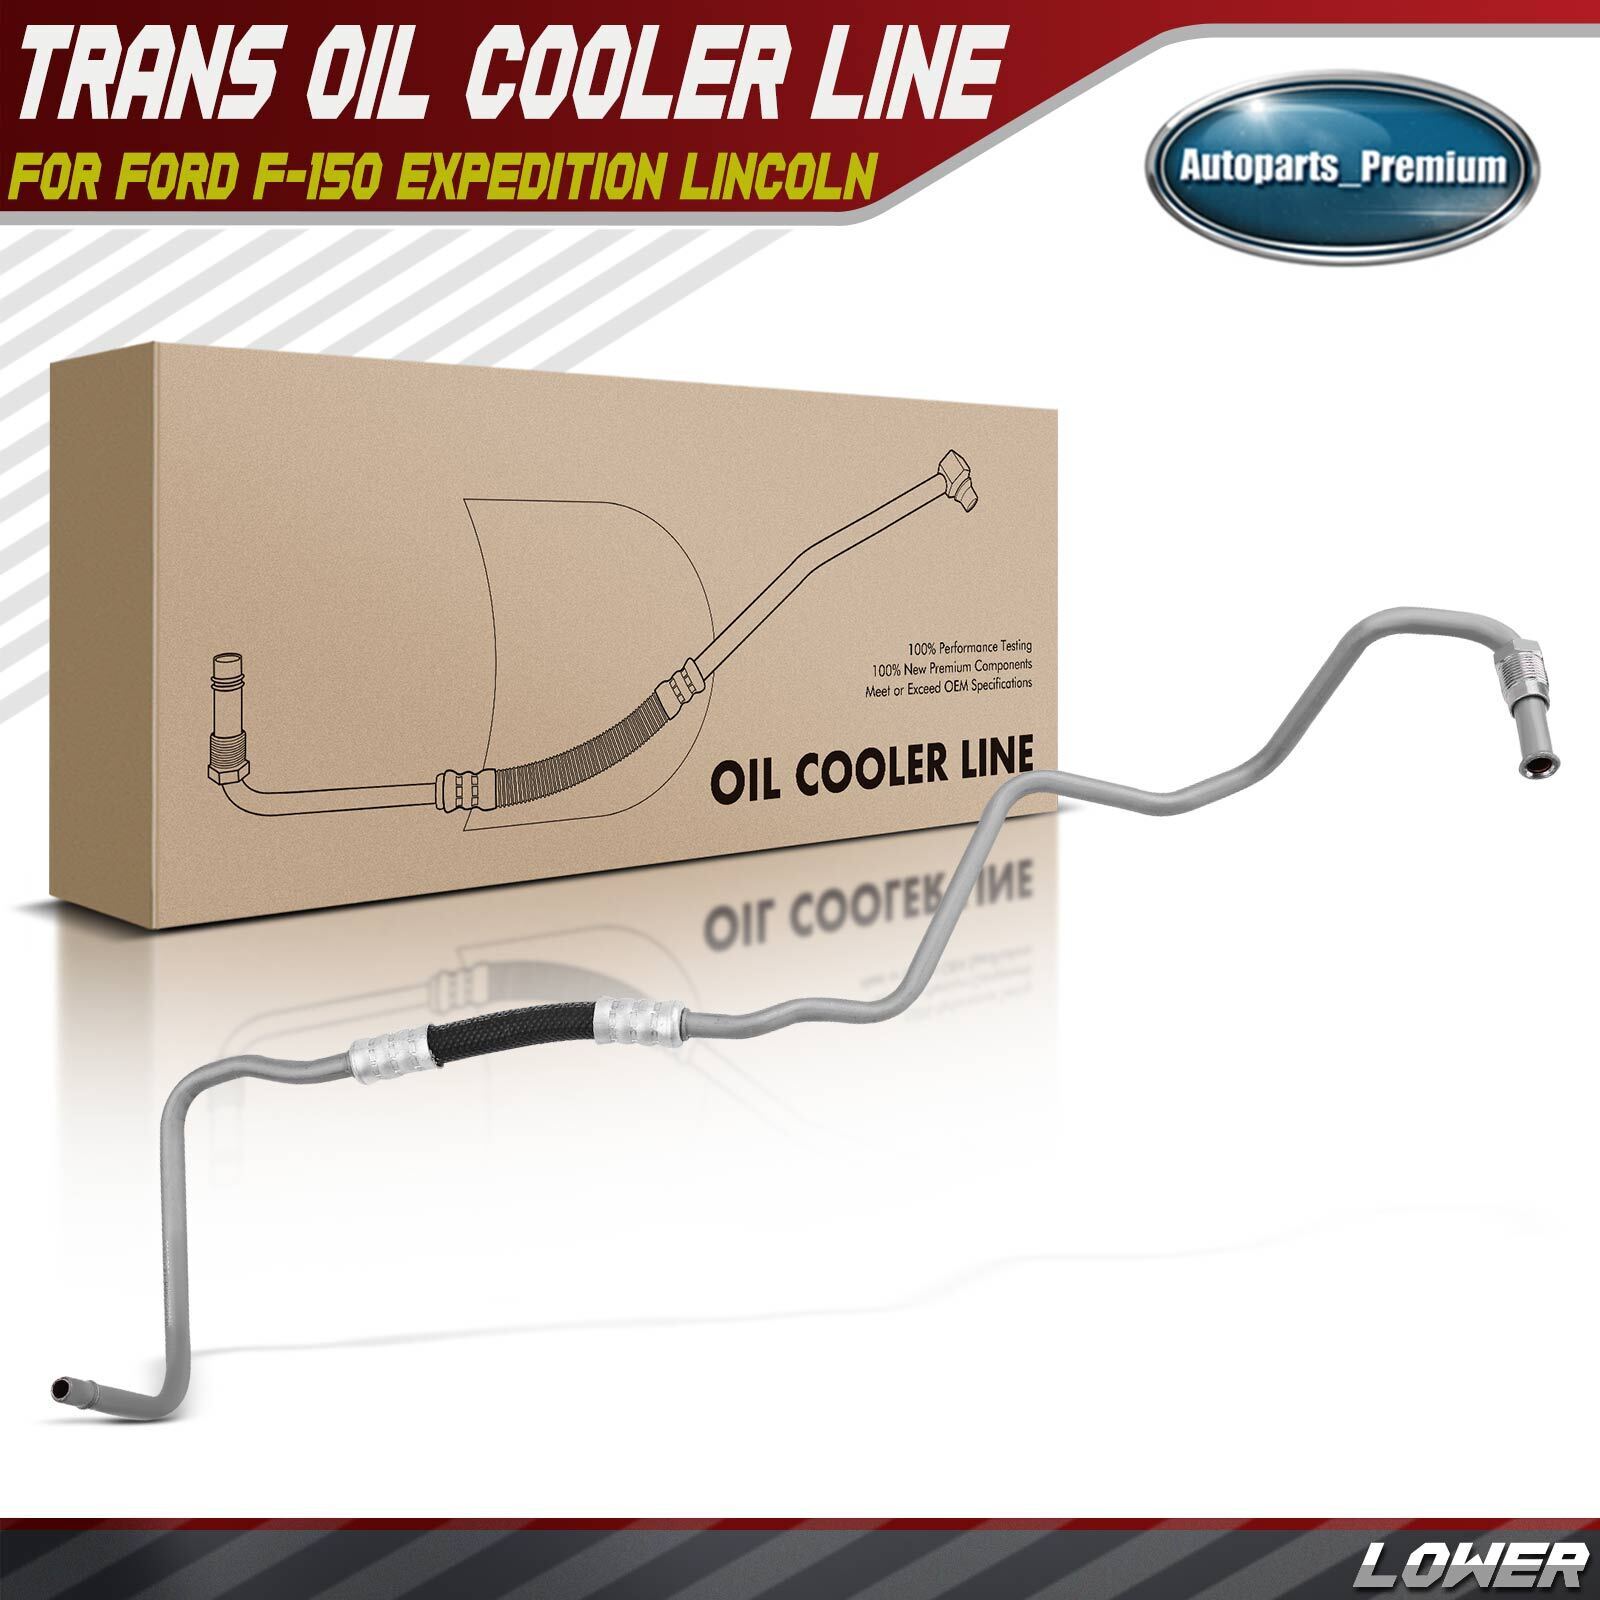 Transmission Oil Cooler Line for Ford F-150 Auxiliary Cooler to Radiator Lower